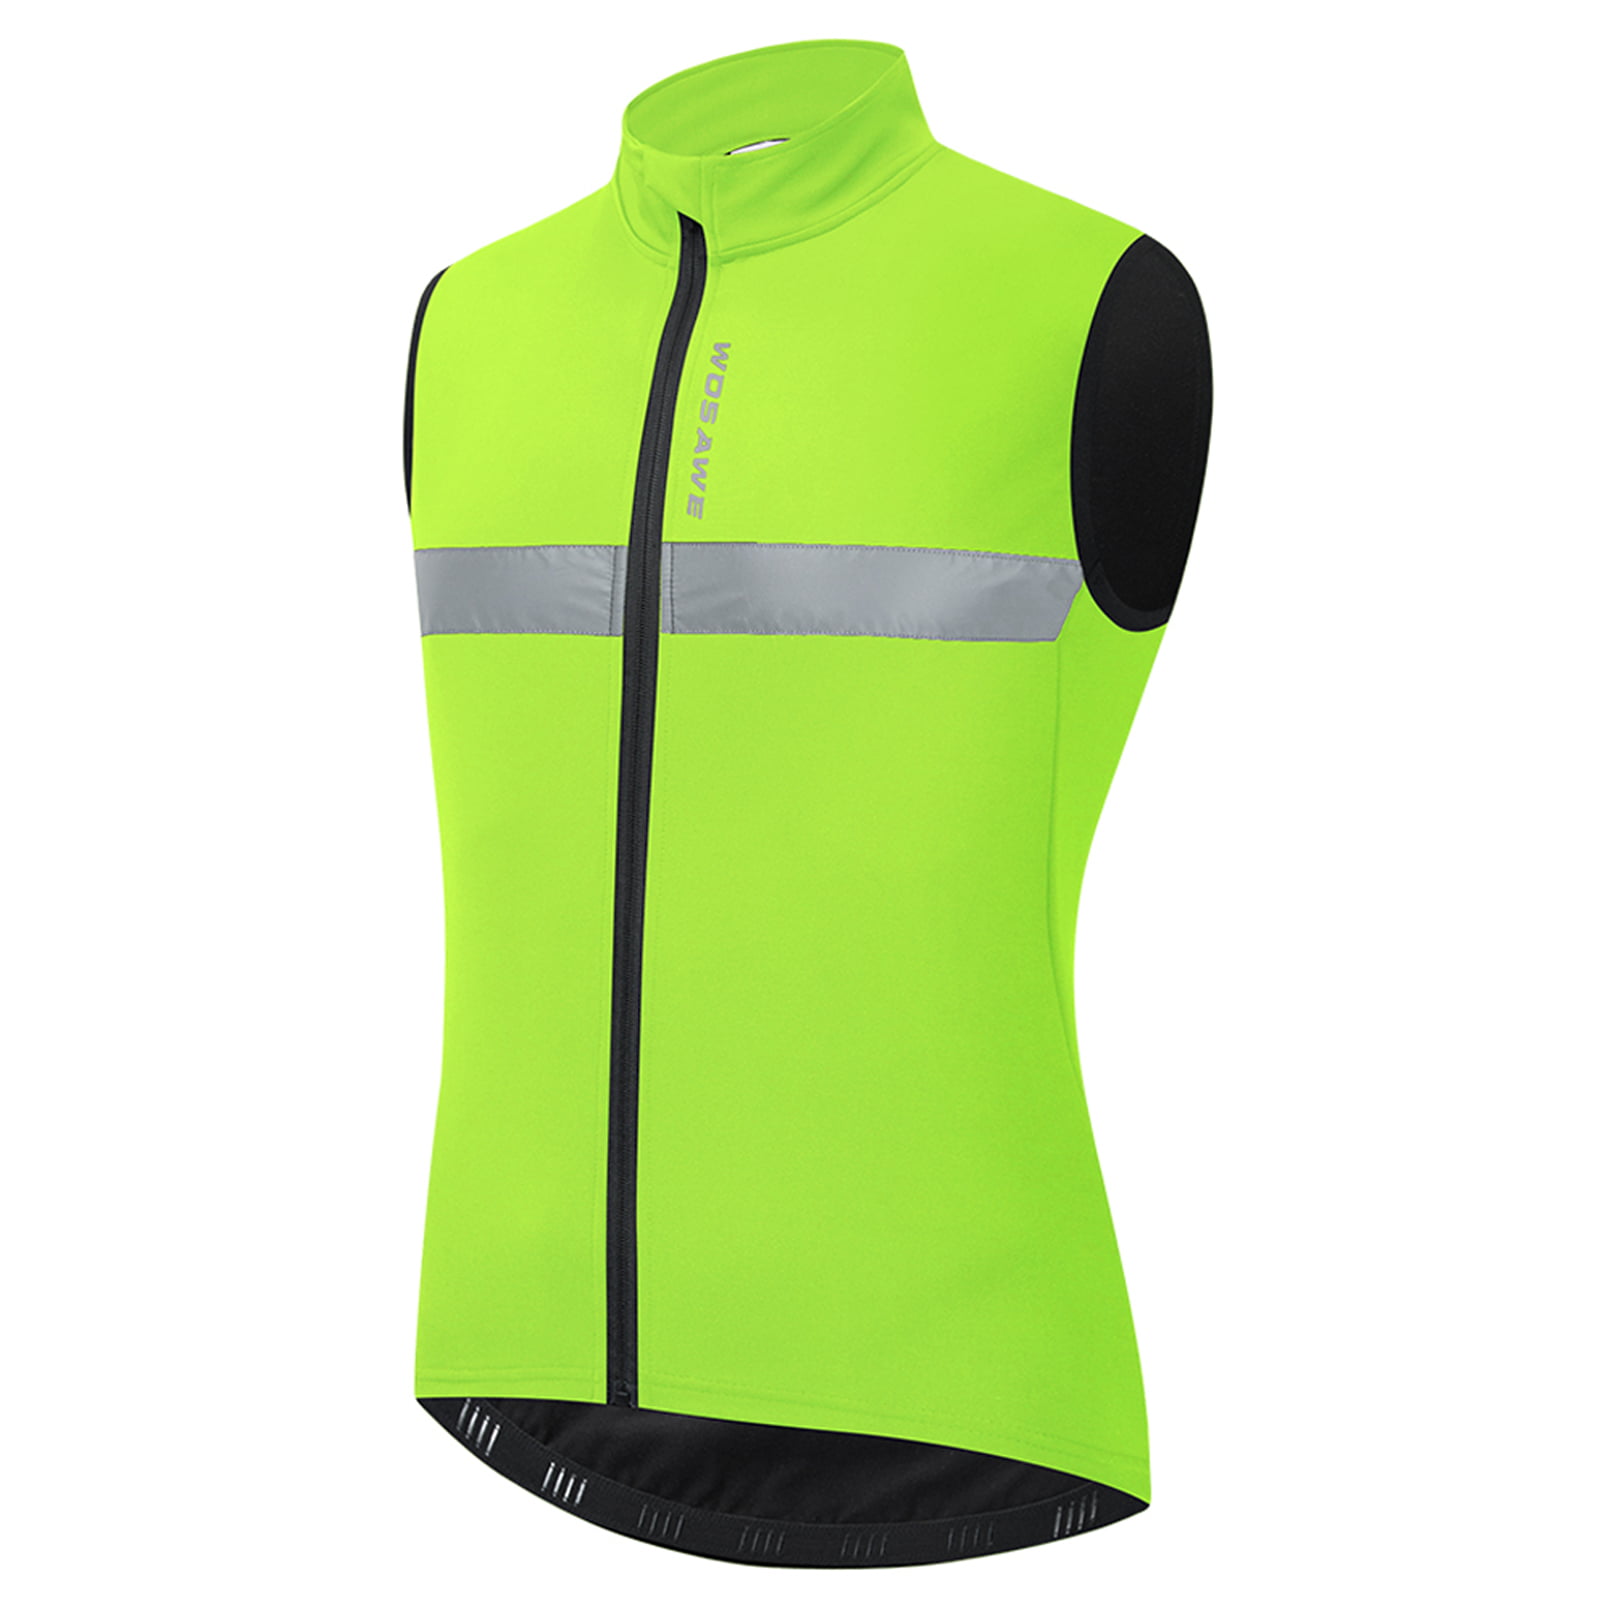 Cycling Vest Windproof Gilet Bike Running Reflective High Visibility